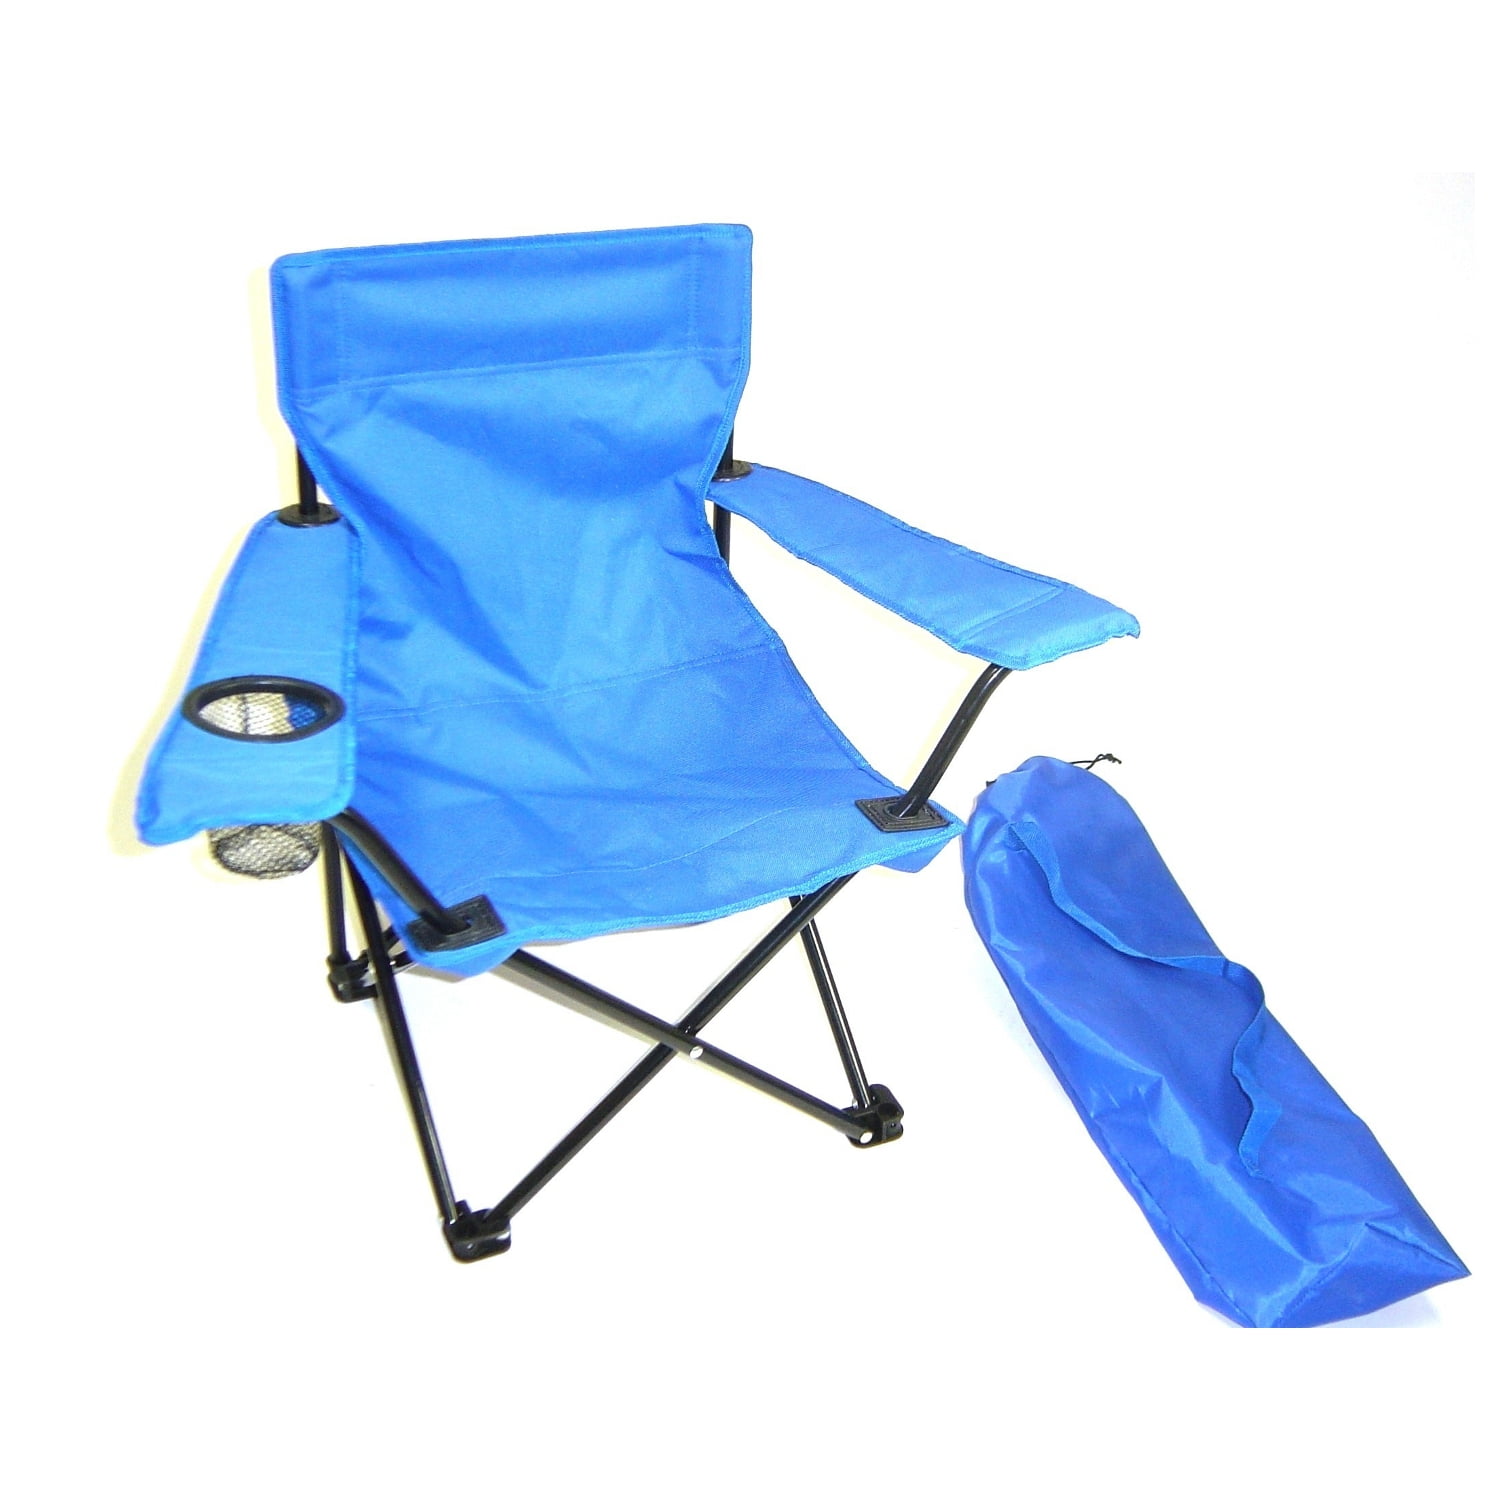 New Collapsible Beach Chair Bag for Living room